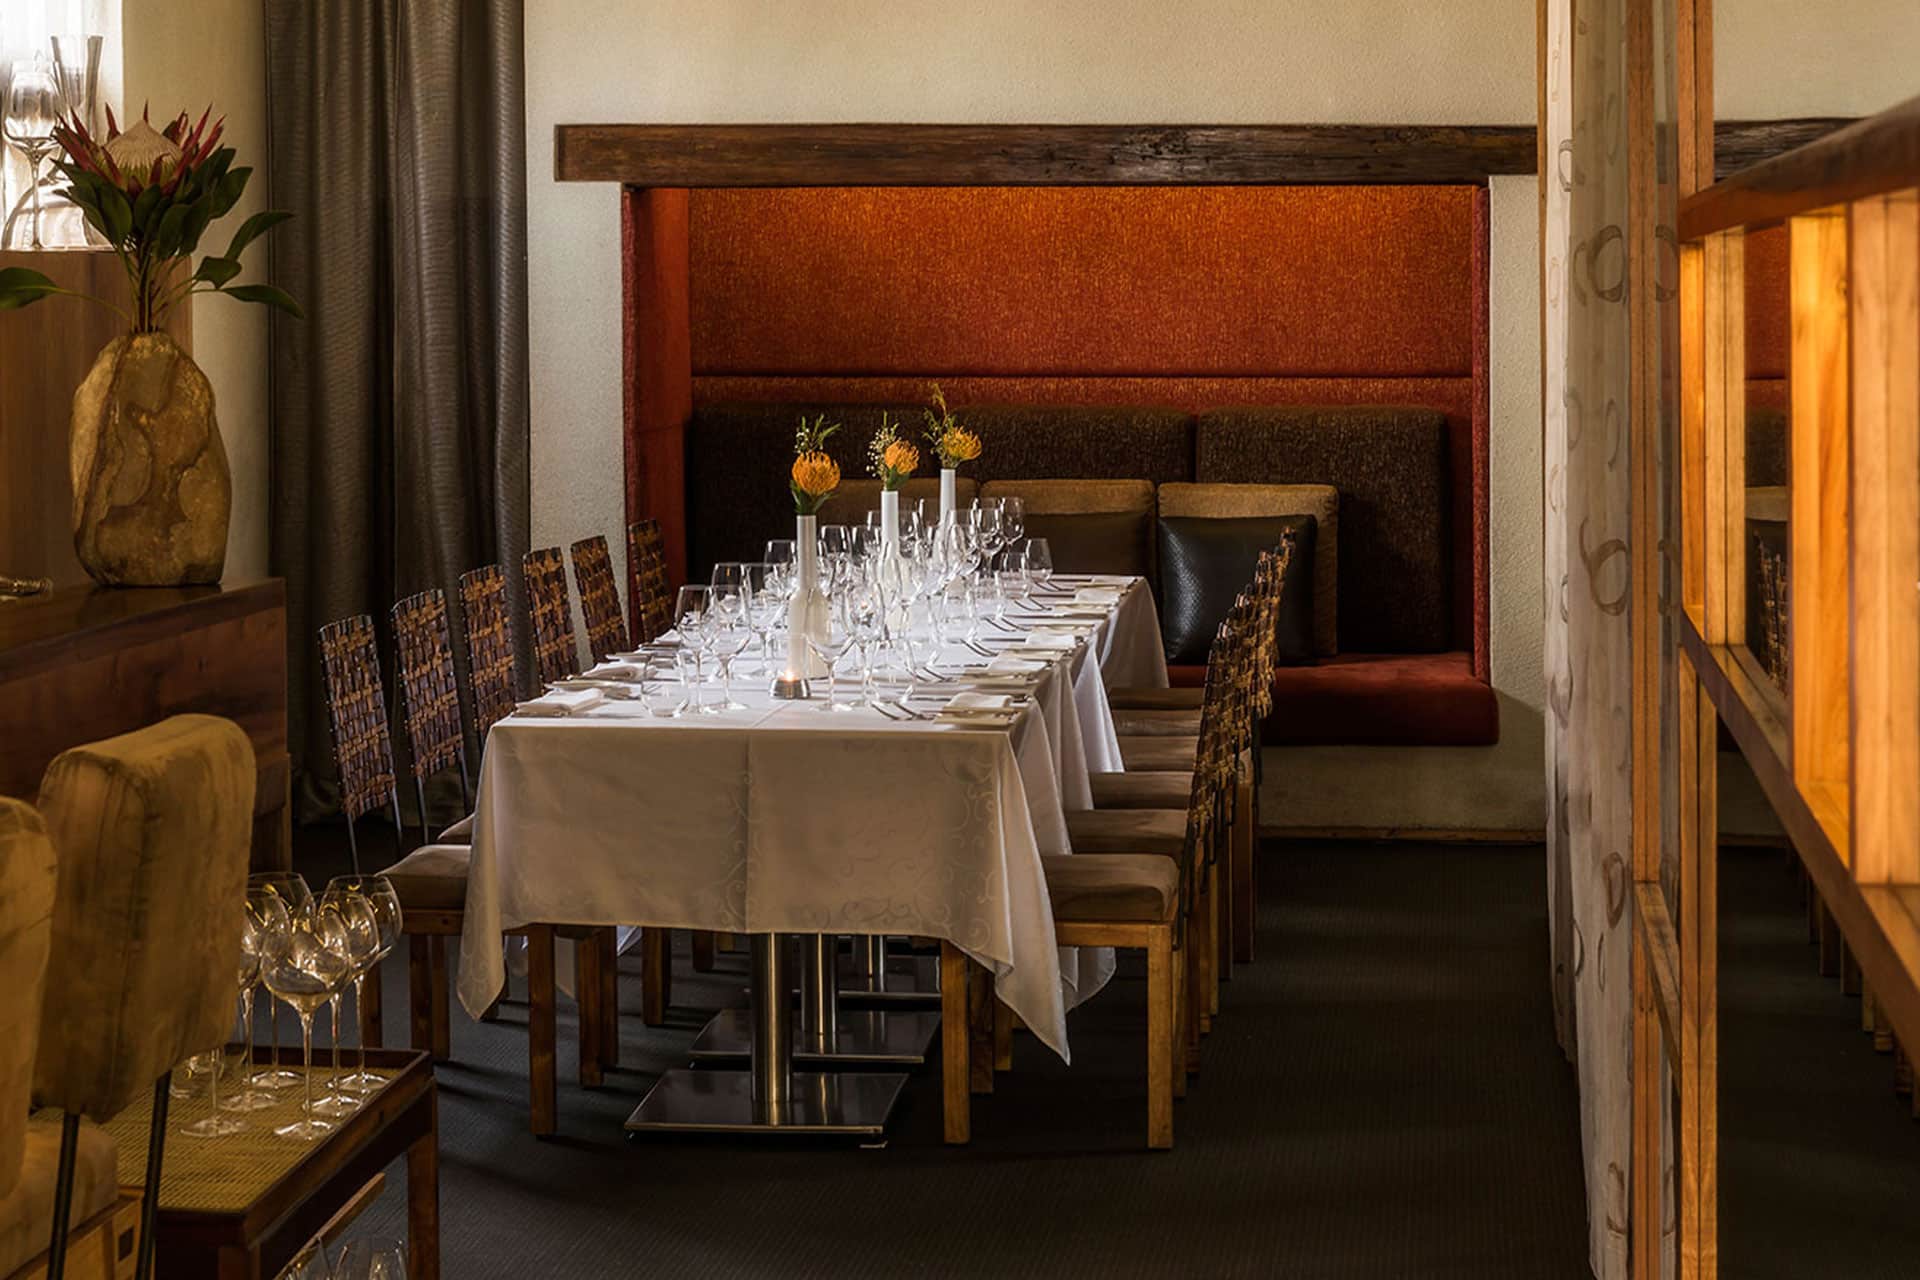 A dining table with chairs around it at Aubergine Restaurant – one of the top 10 fine dining restaurants in Cape Town.